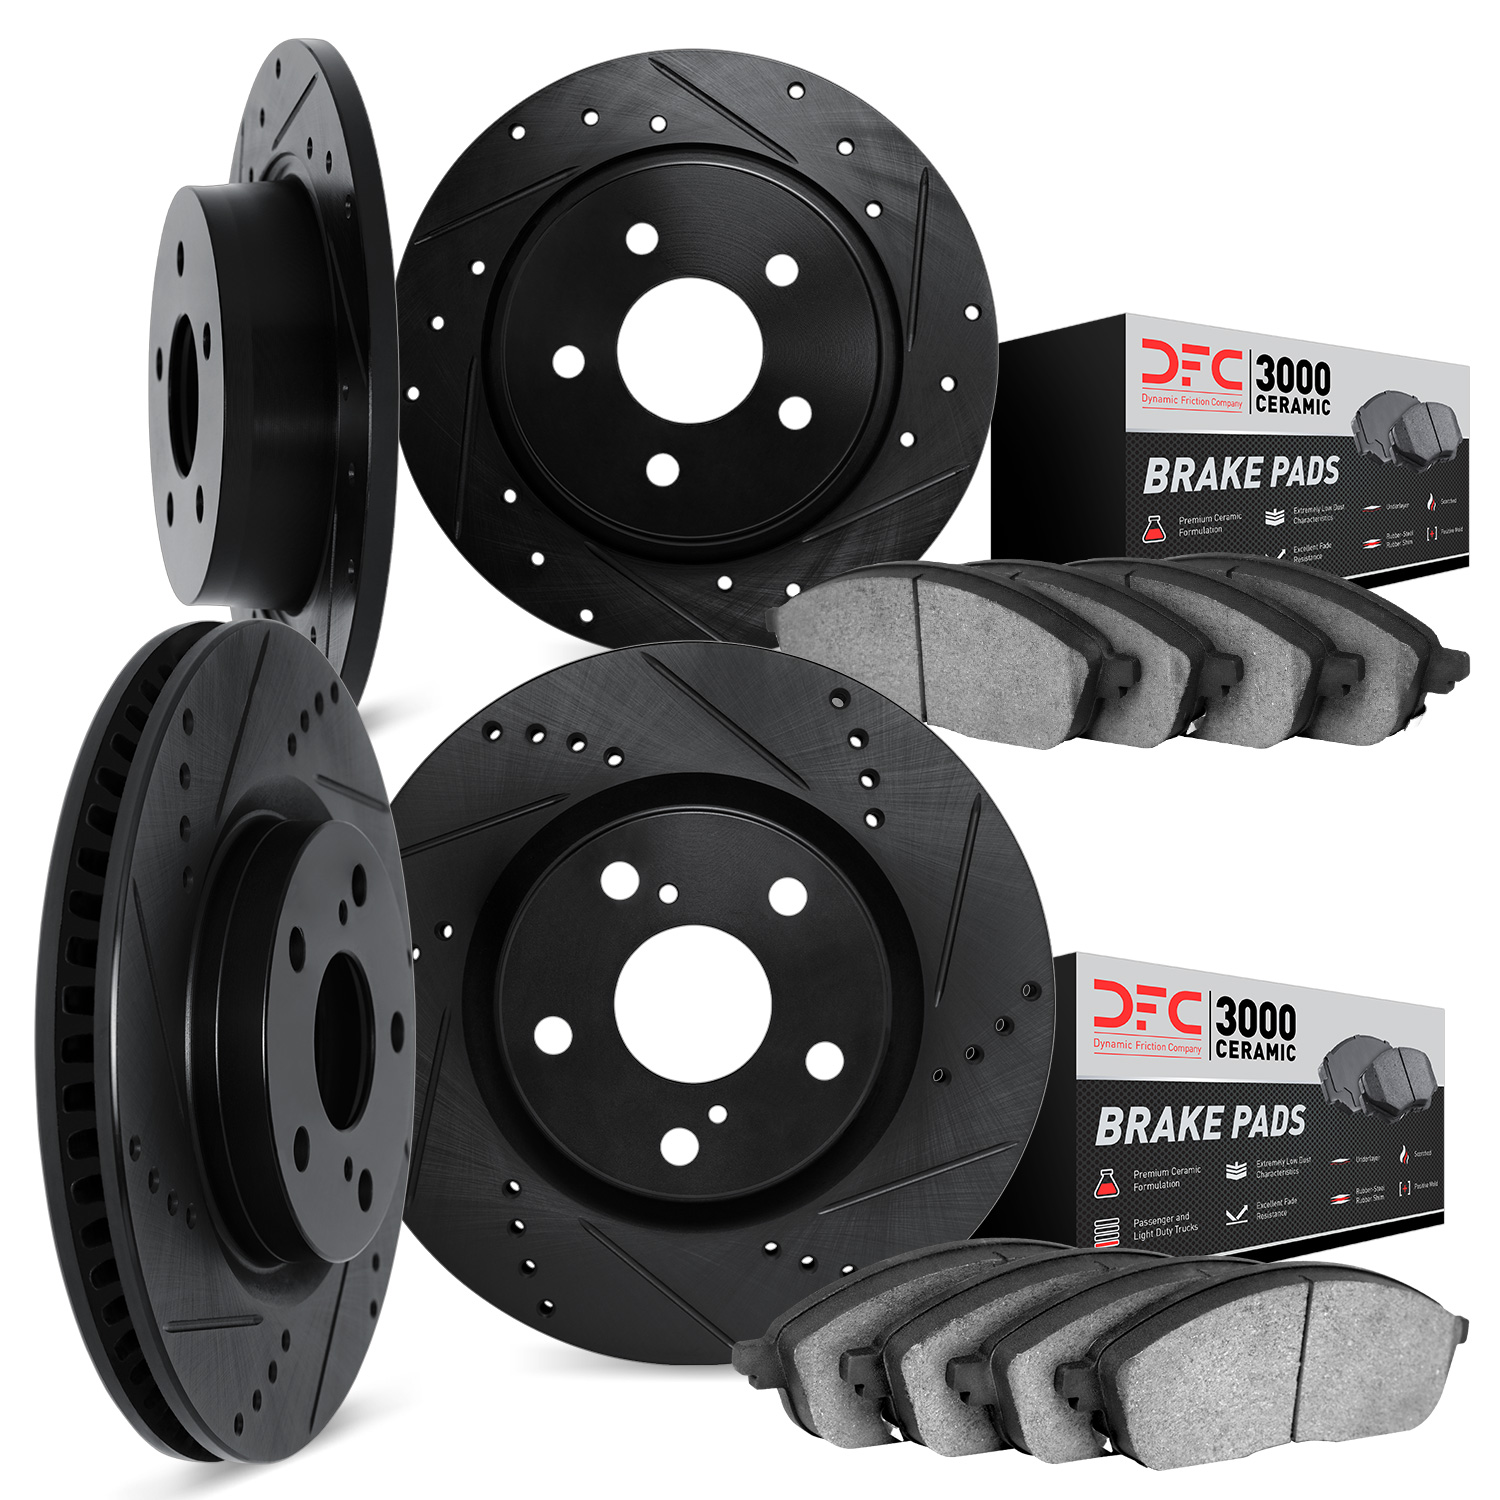 8304-59082 Drilled/Slotted Brake Rotors with 3000-Series Ceramic Brake Pads Kit [Black], 2007-2015 Acura/Honda, Position: Front